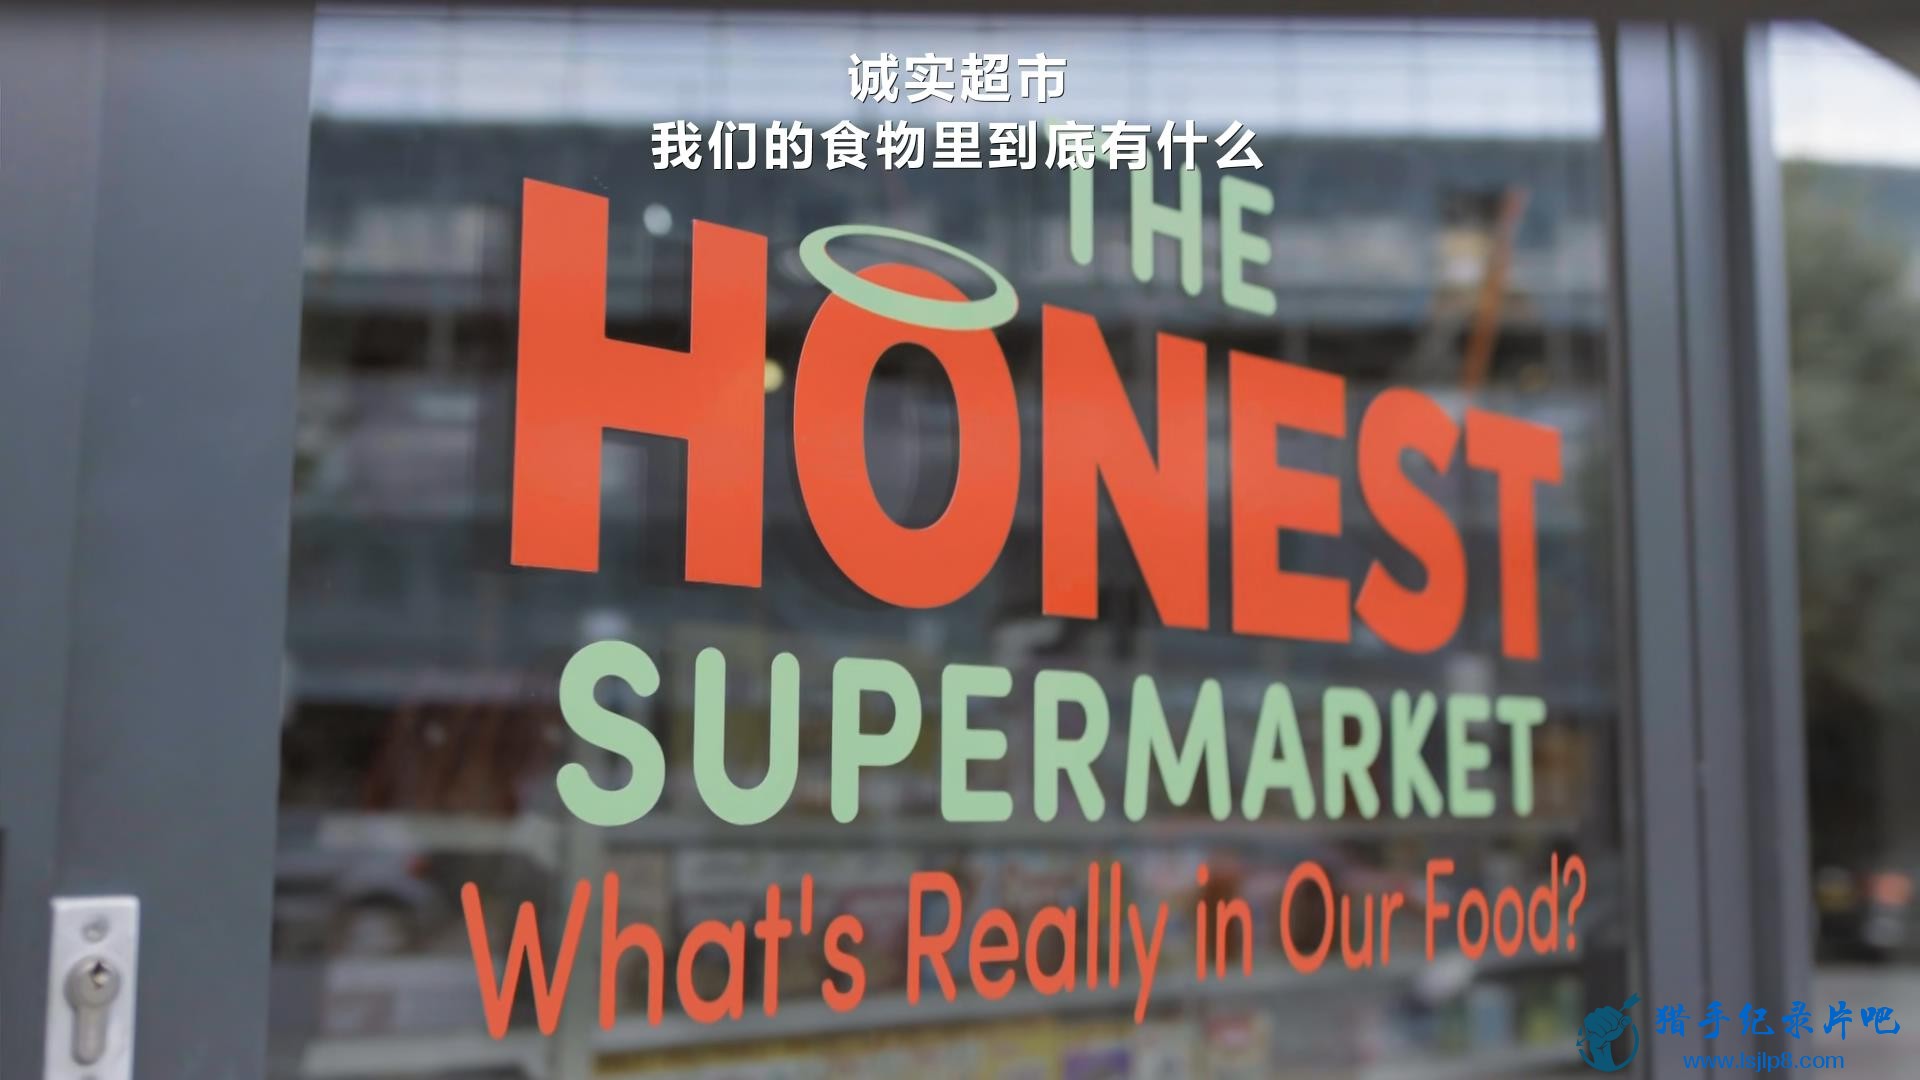 BBC.Horizon.2019.The.Honest.Supermarket.Whats.Really.in.Our.Food.1080p.HDTV.x265.jpg